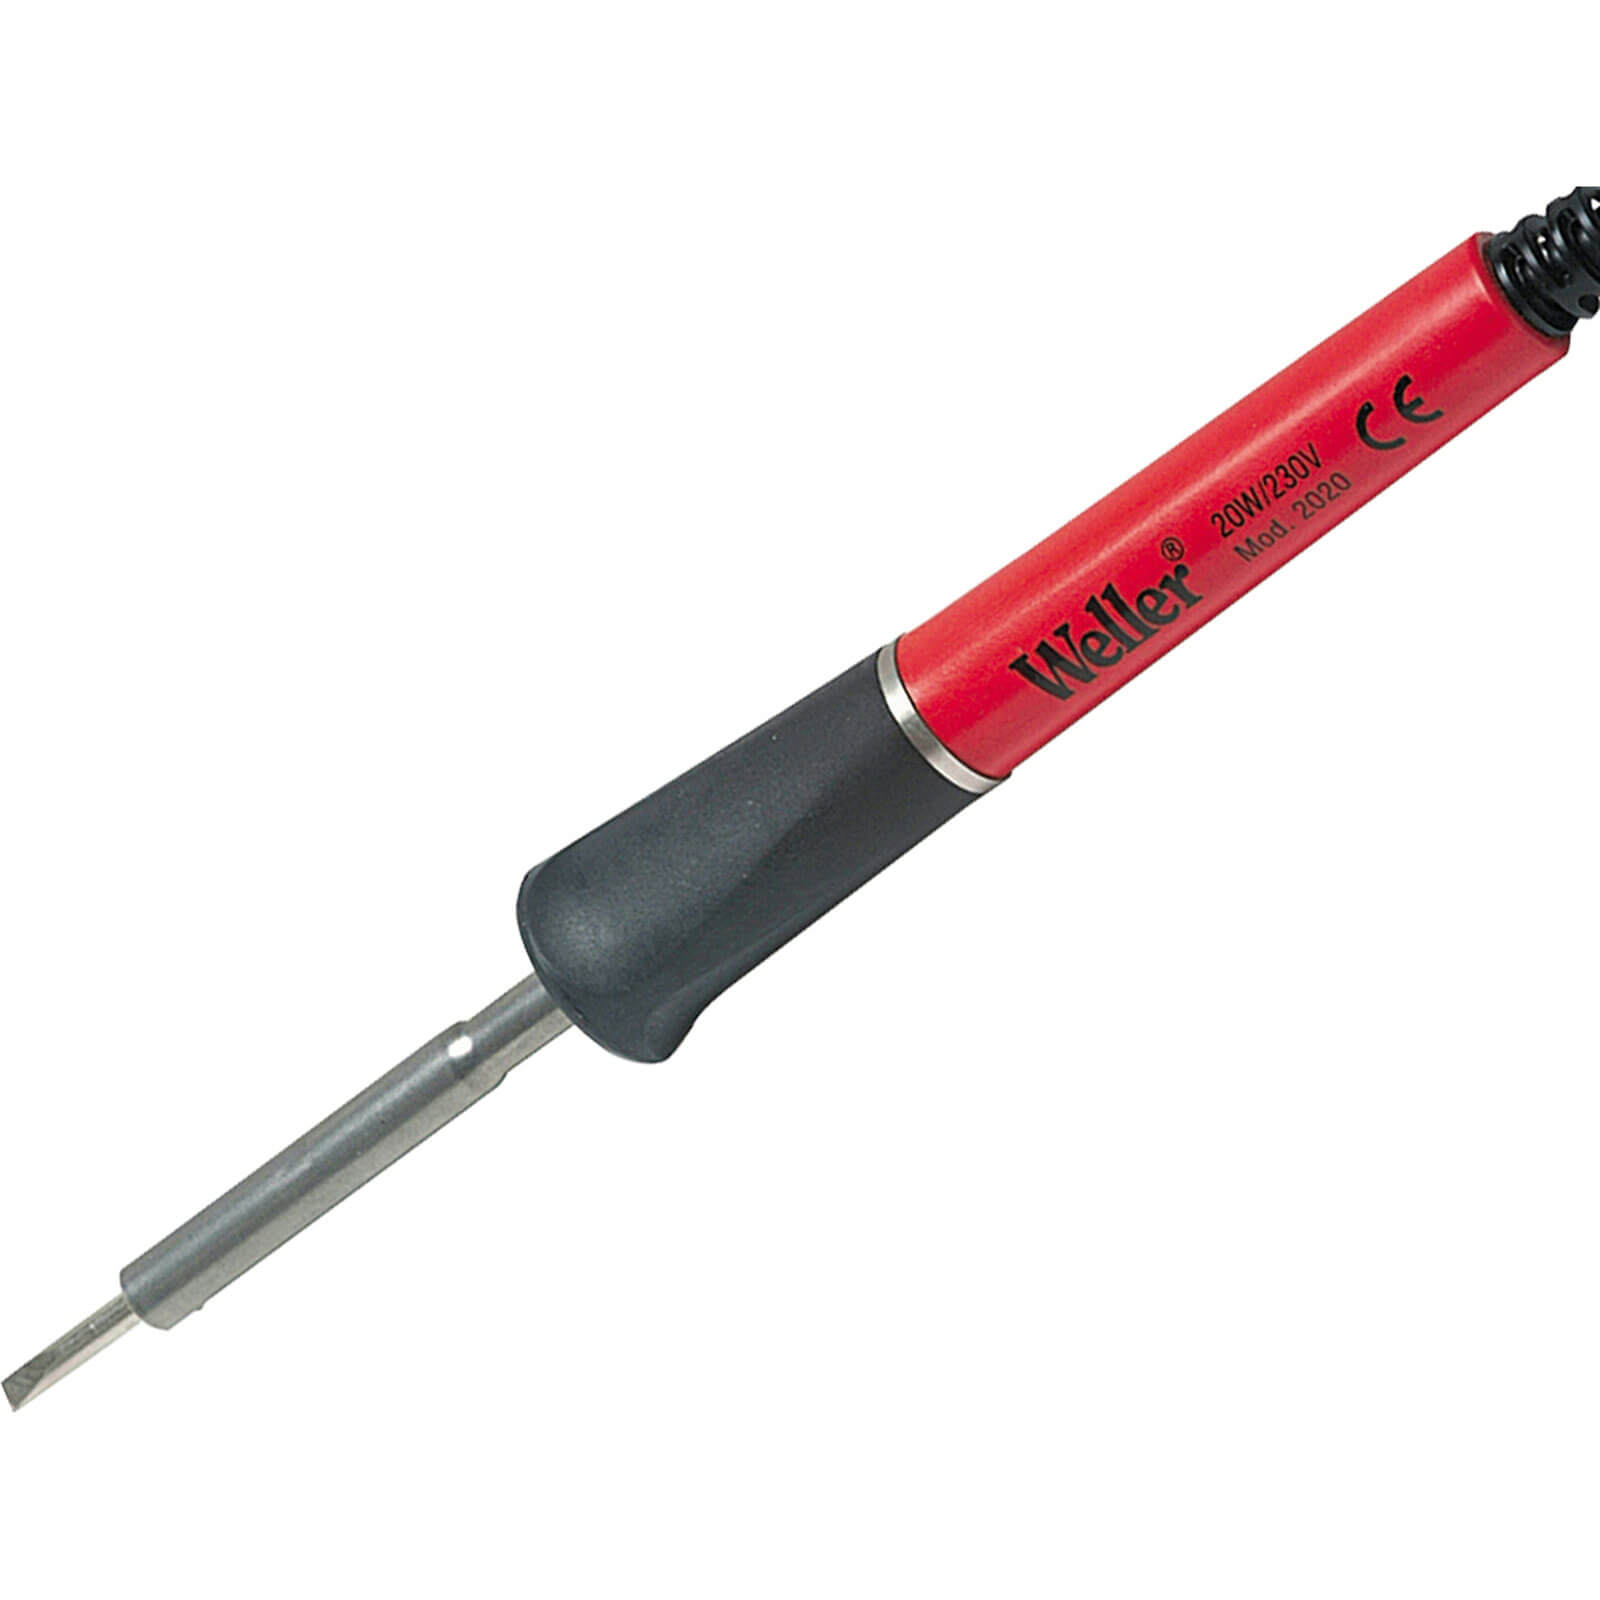 Weller 2020 Soldering Iron With Plug 20W 240v